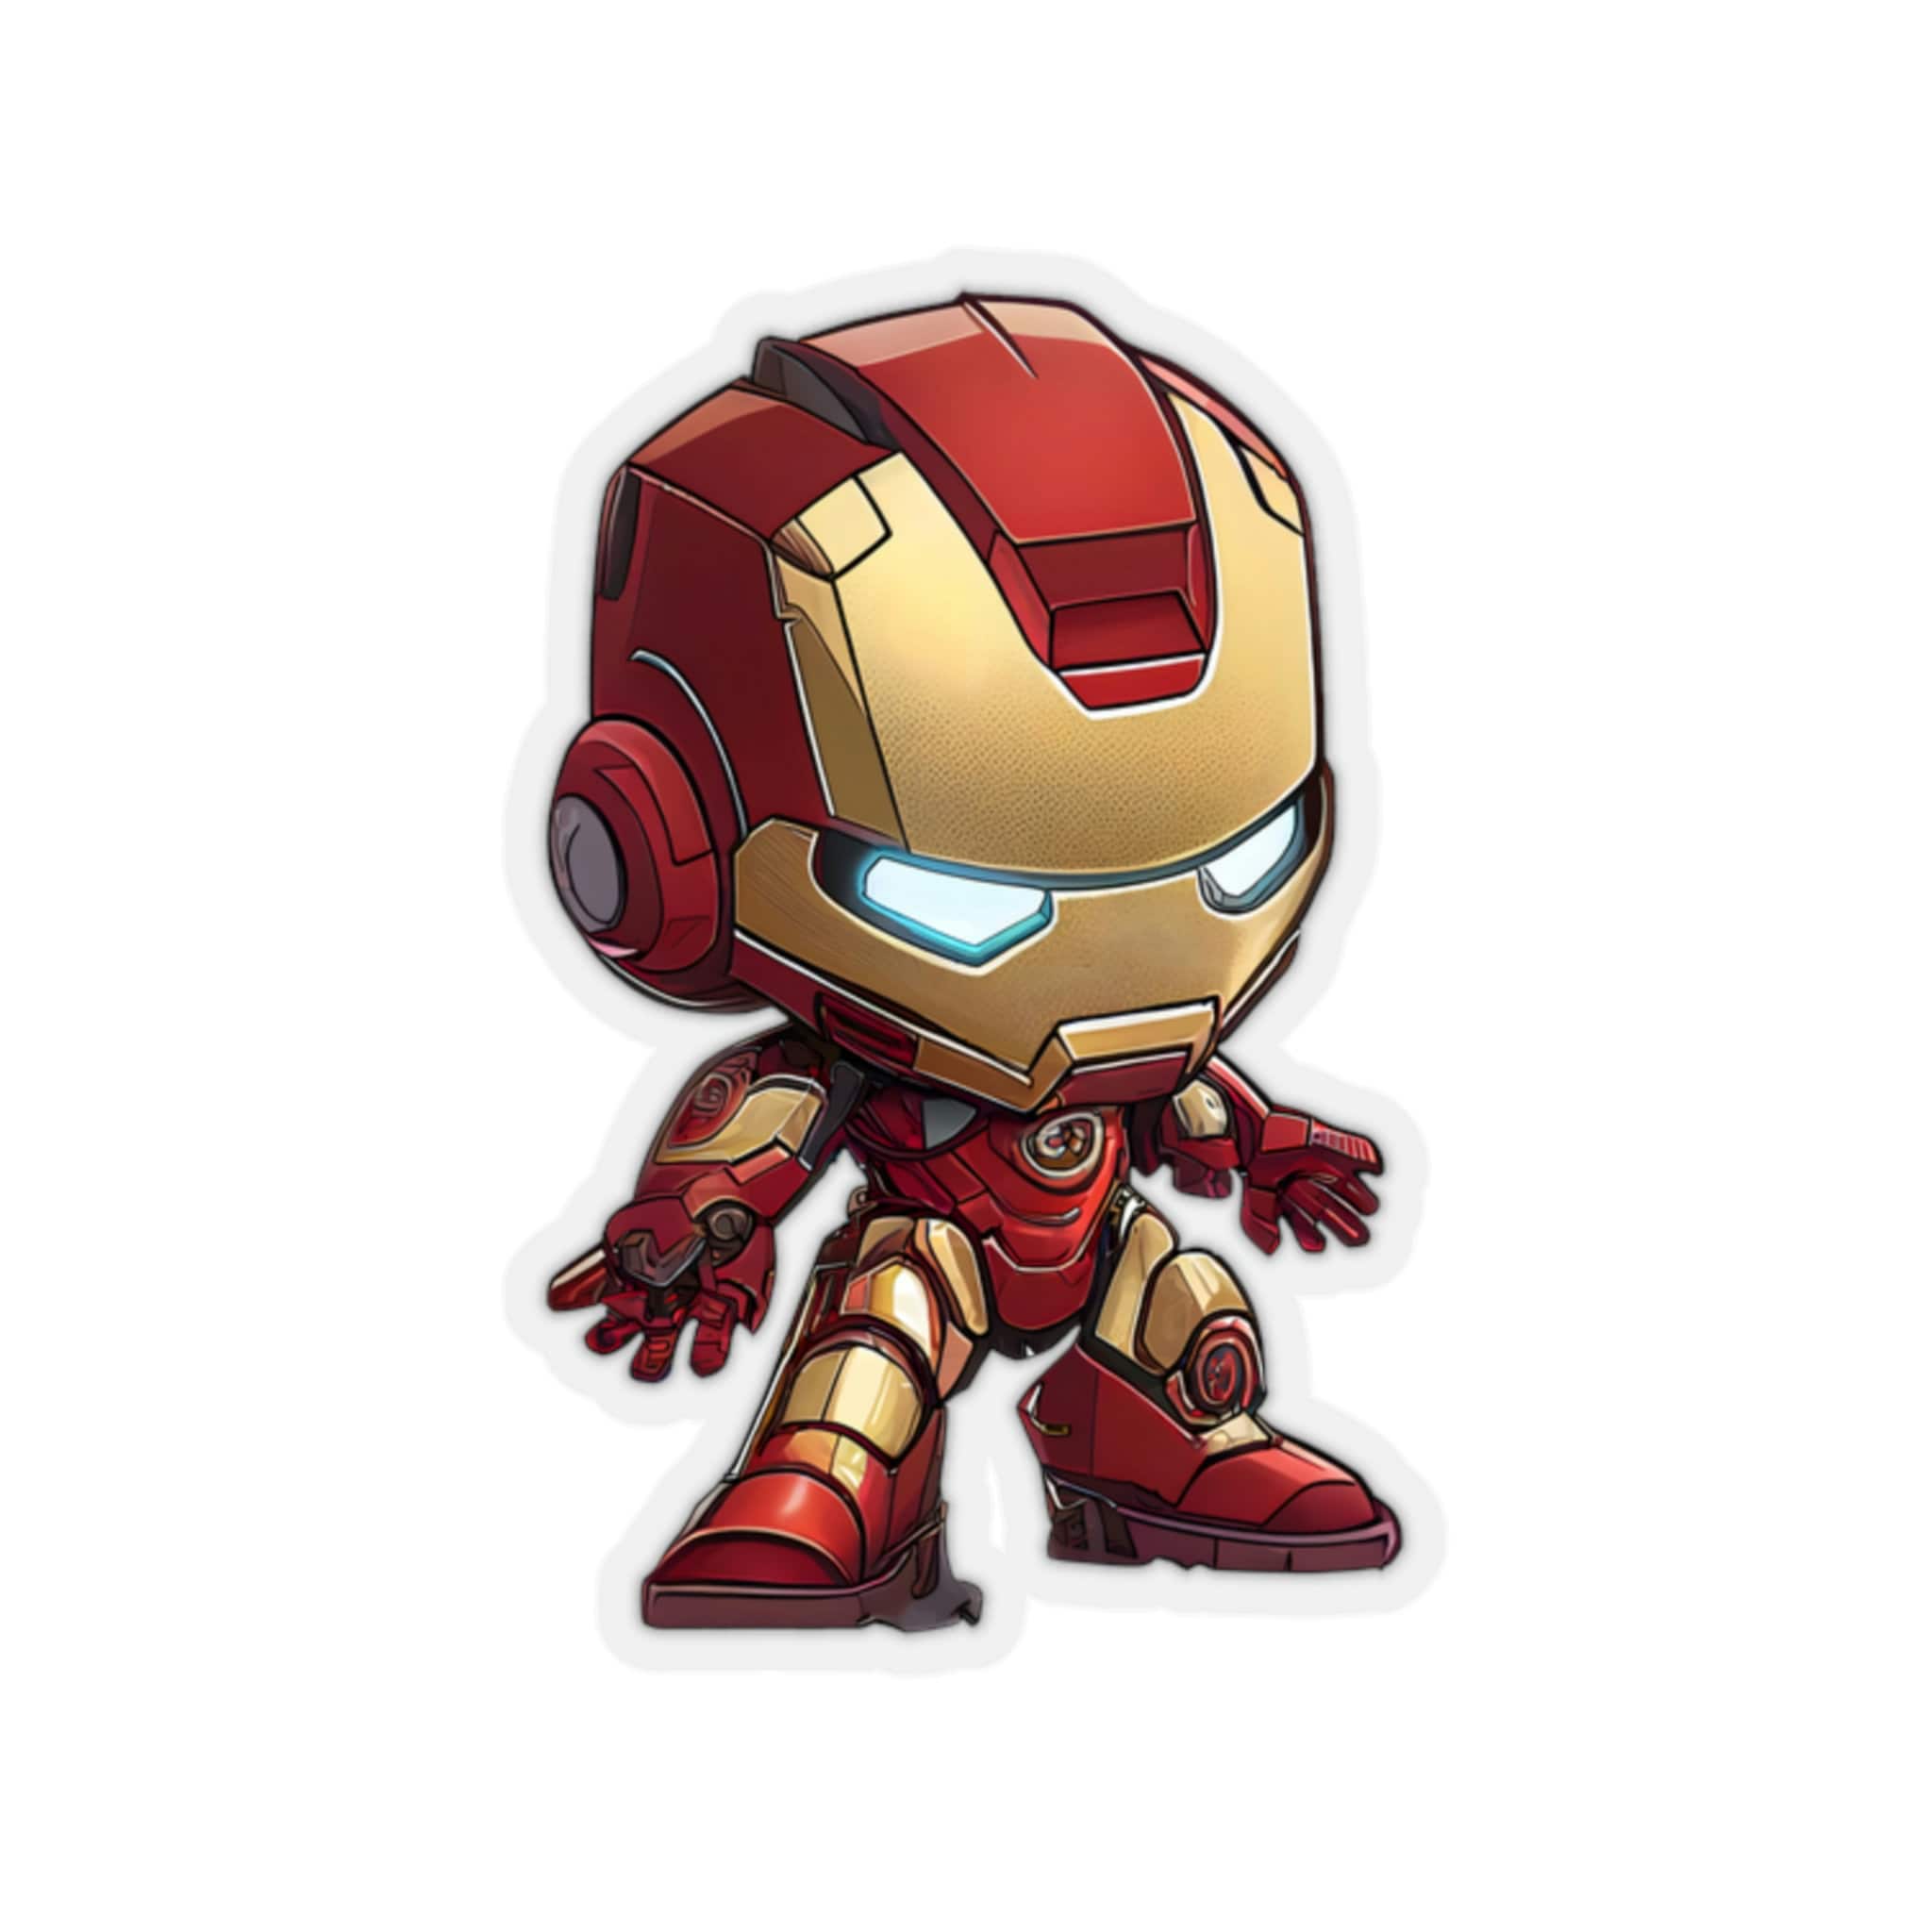 Draw your favorite hero with these cute chibi iron man tutorials